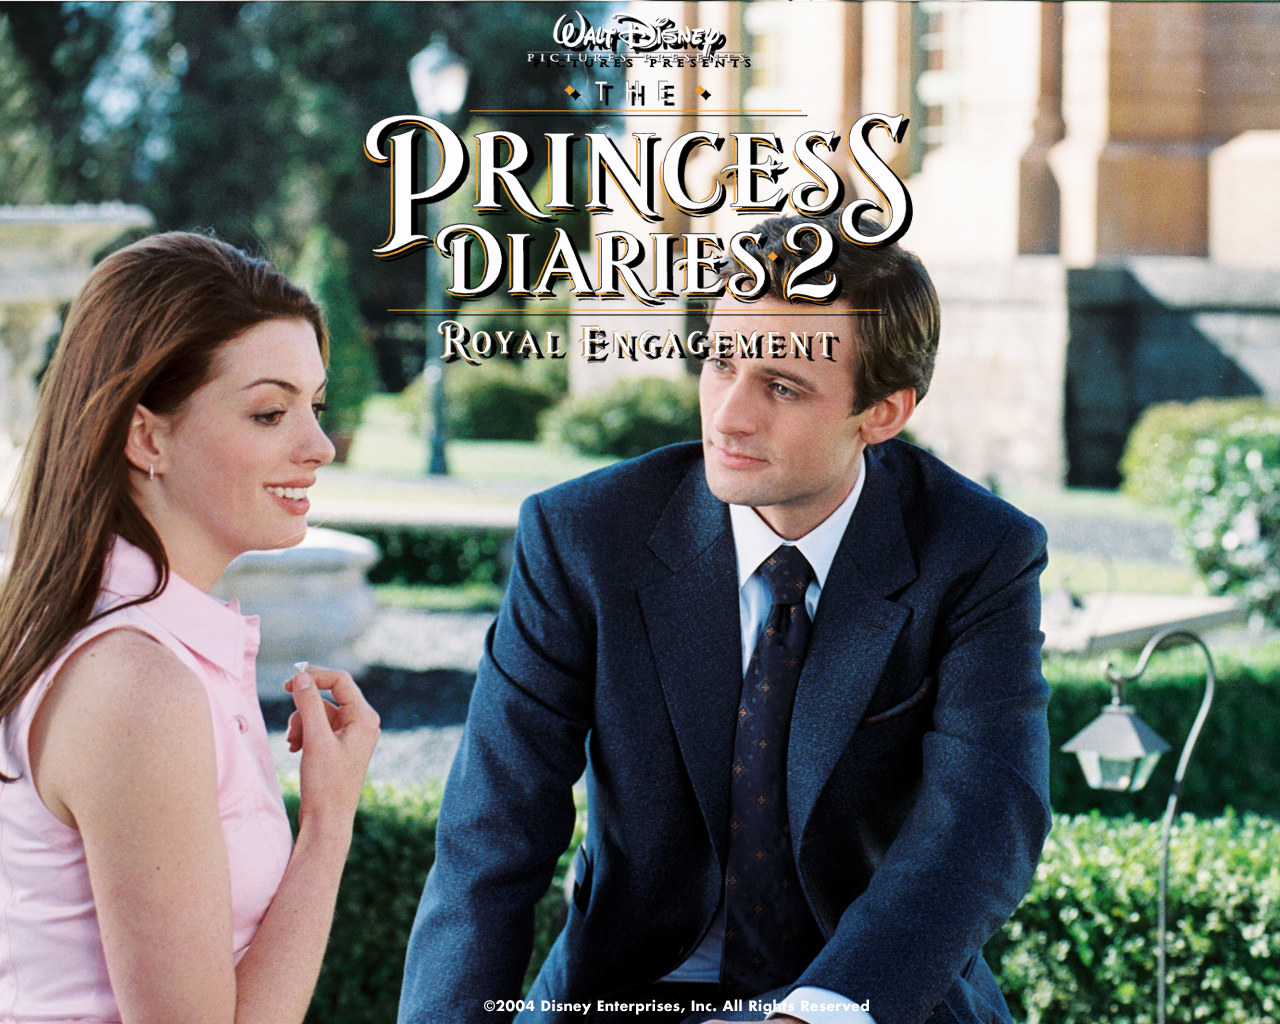 Anne Hathaway in The Princess Diaries 2- Royal Engagement Wallpaper 1280-960